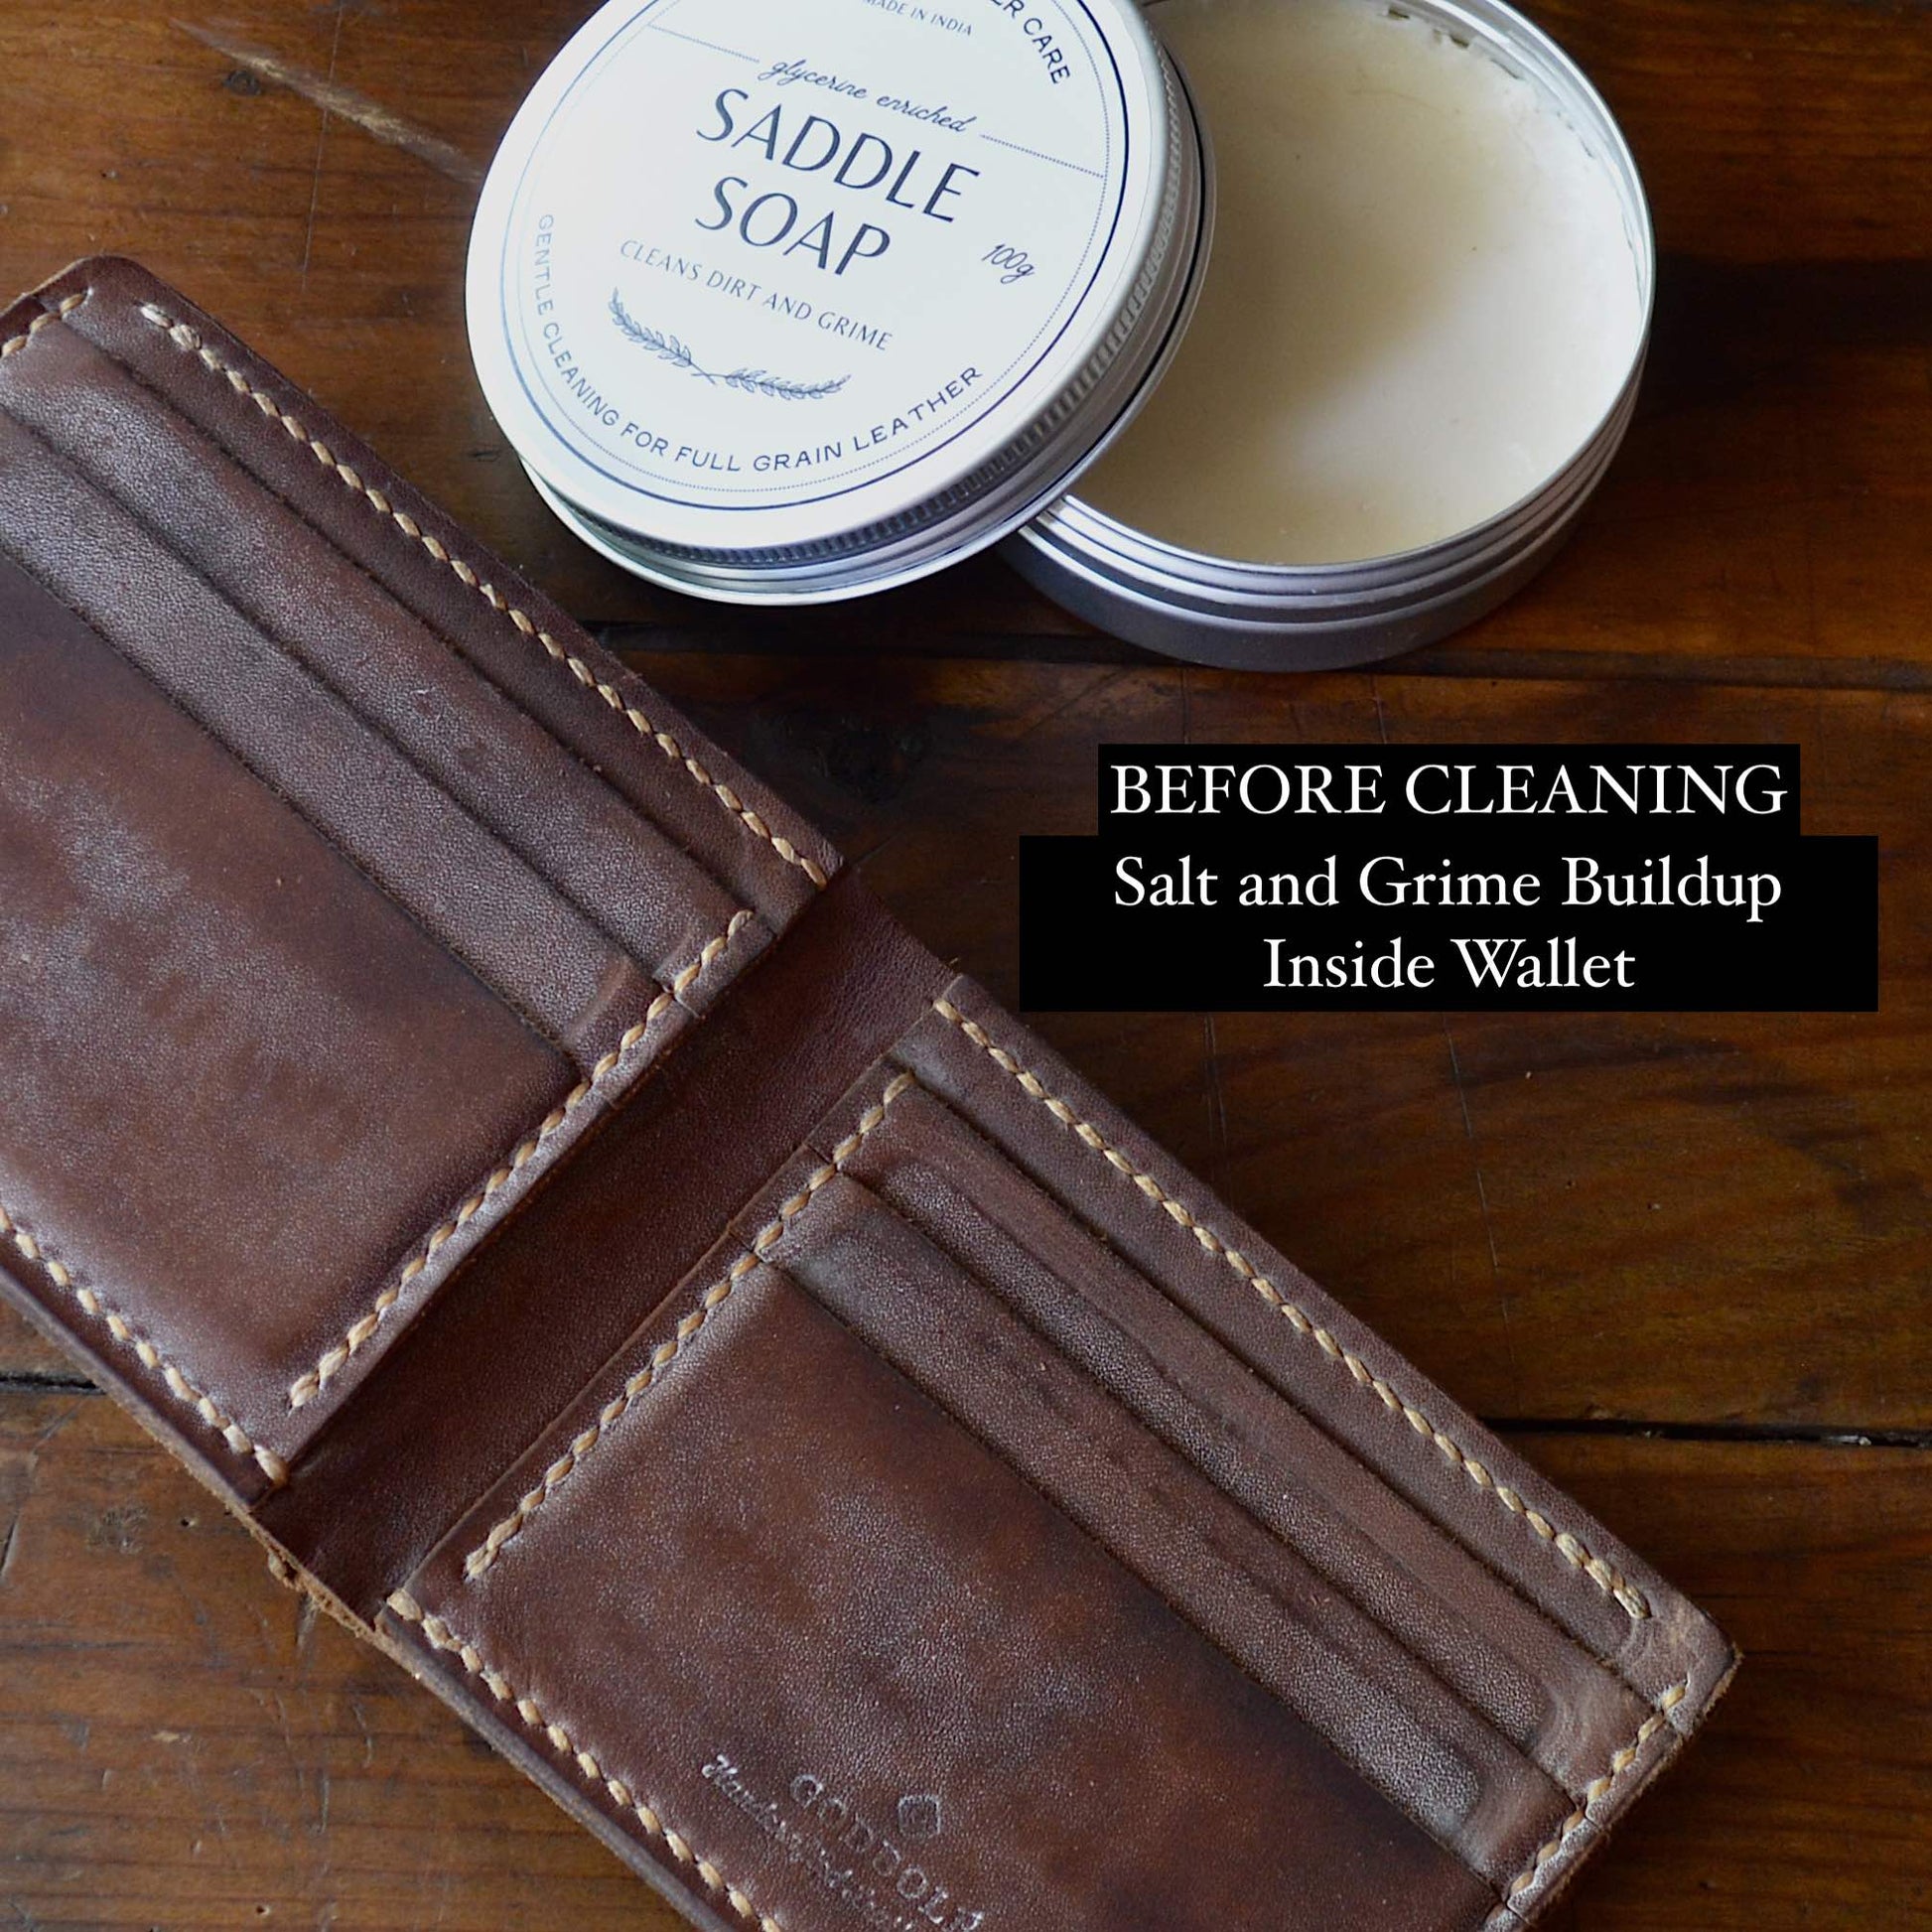 Saddle Soap - 100 grams - Cleans All Types of Leather Goods, Made in India  – Godbole Gear